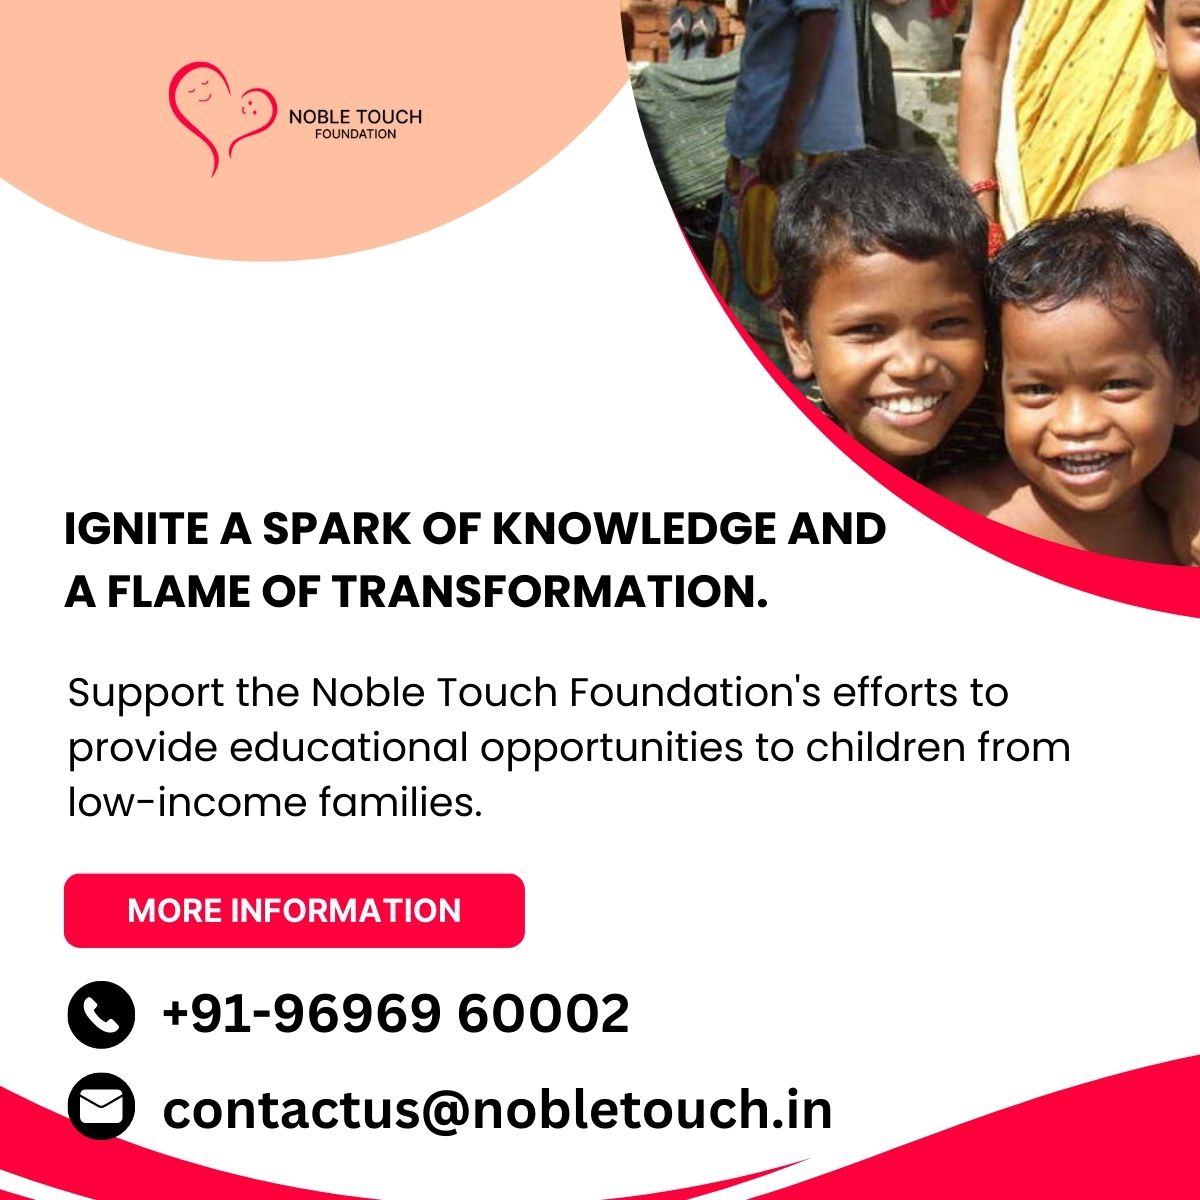 The acclaim of the future can be brighter if we all pull together and support Noble Touch's cause by making a donation today.

#EducationForAll #EmpowerChildren #TransformingFutures #EqualOpportunities #EducationMatters #ChildrensEducation #SupportingDreams #BreakingBarriers